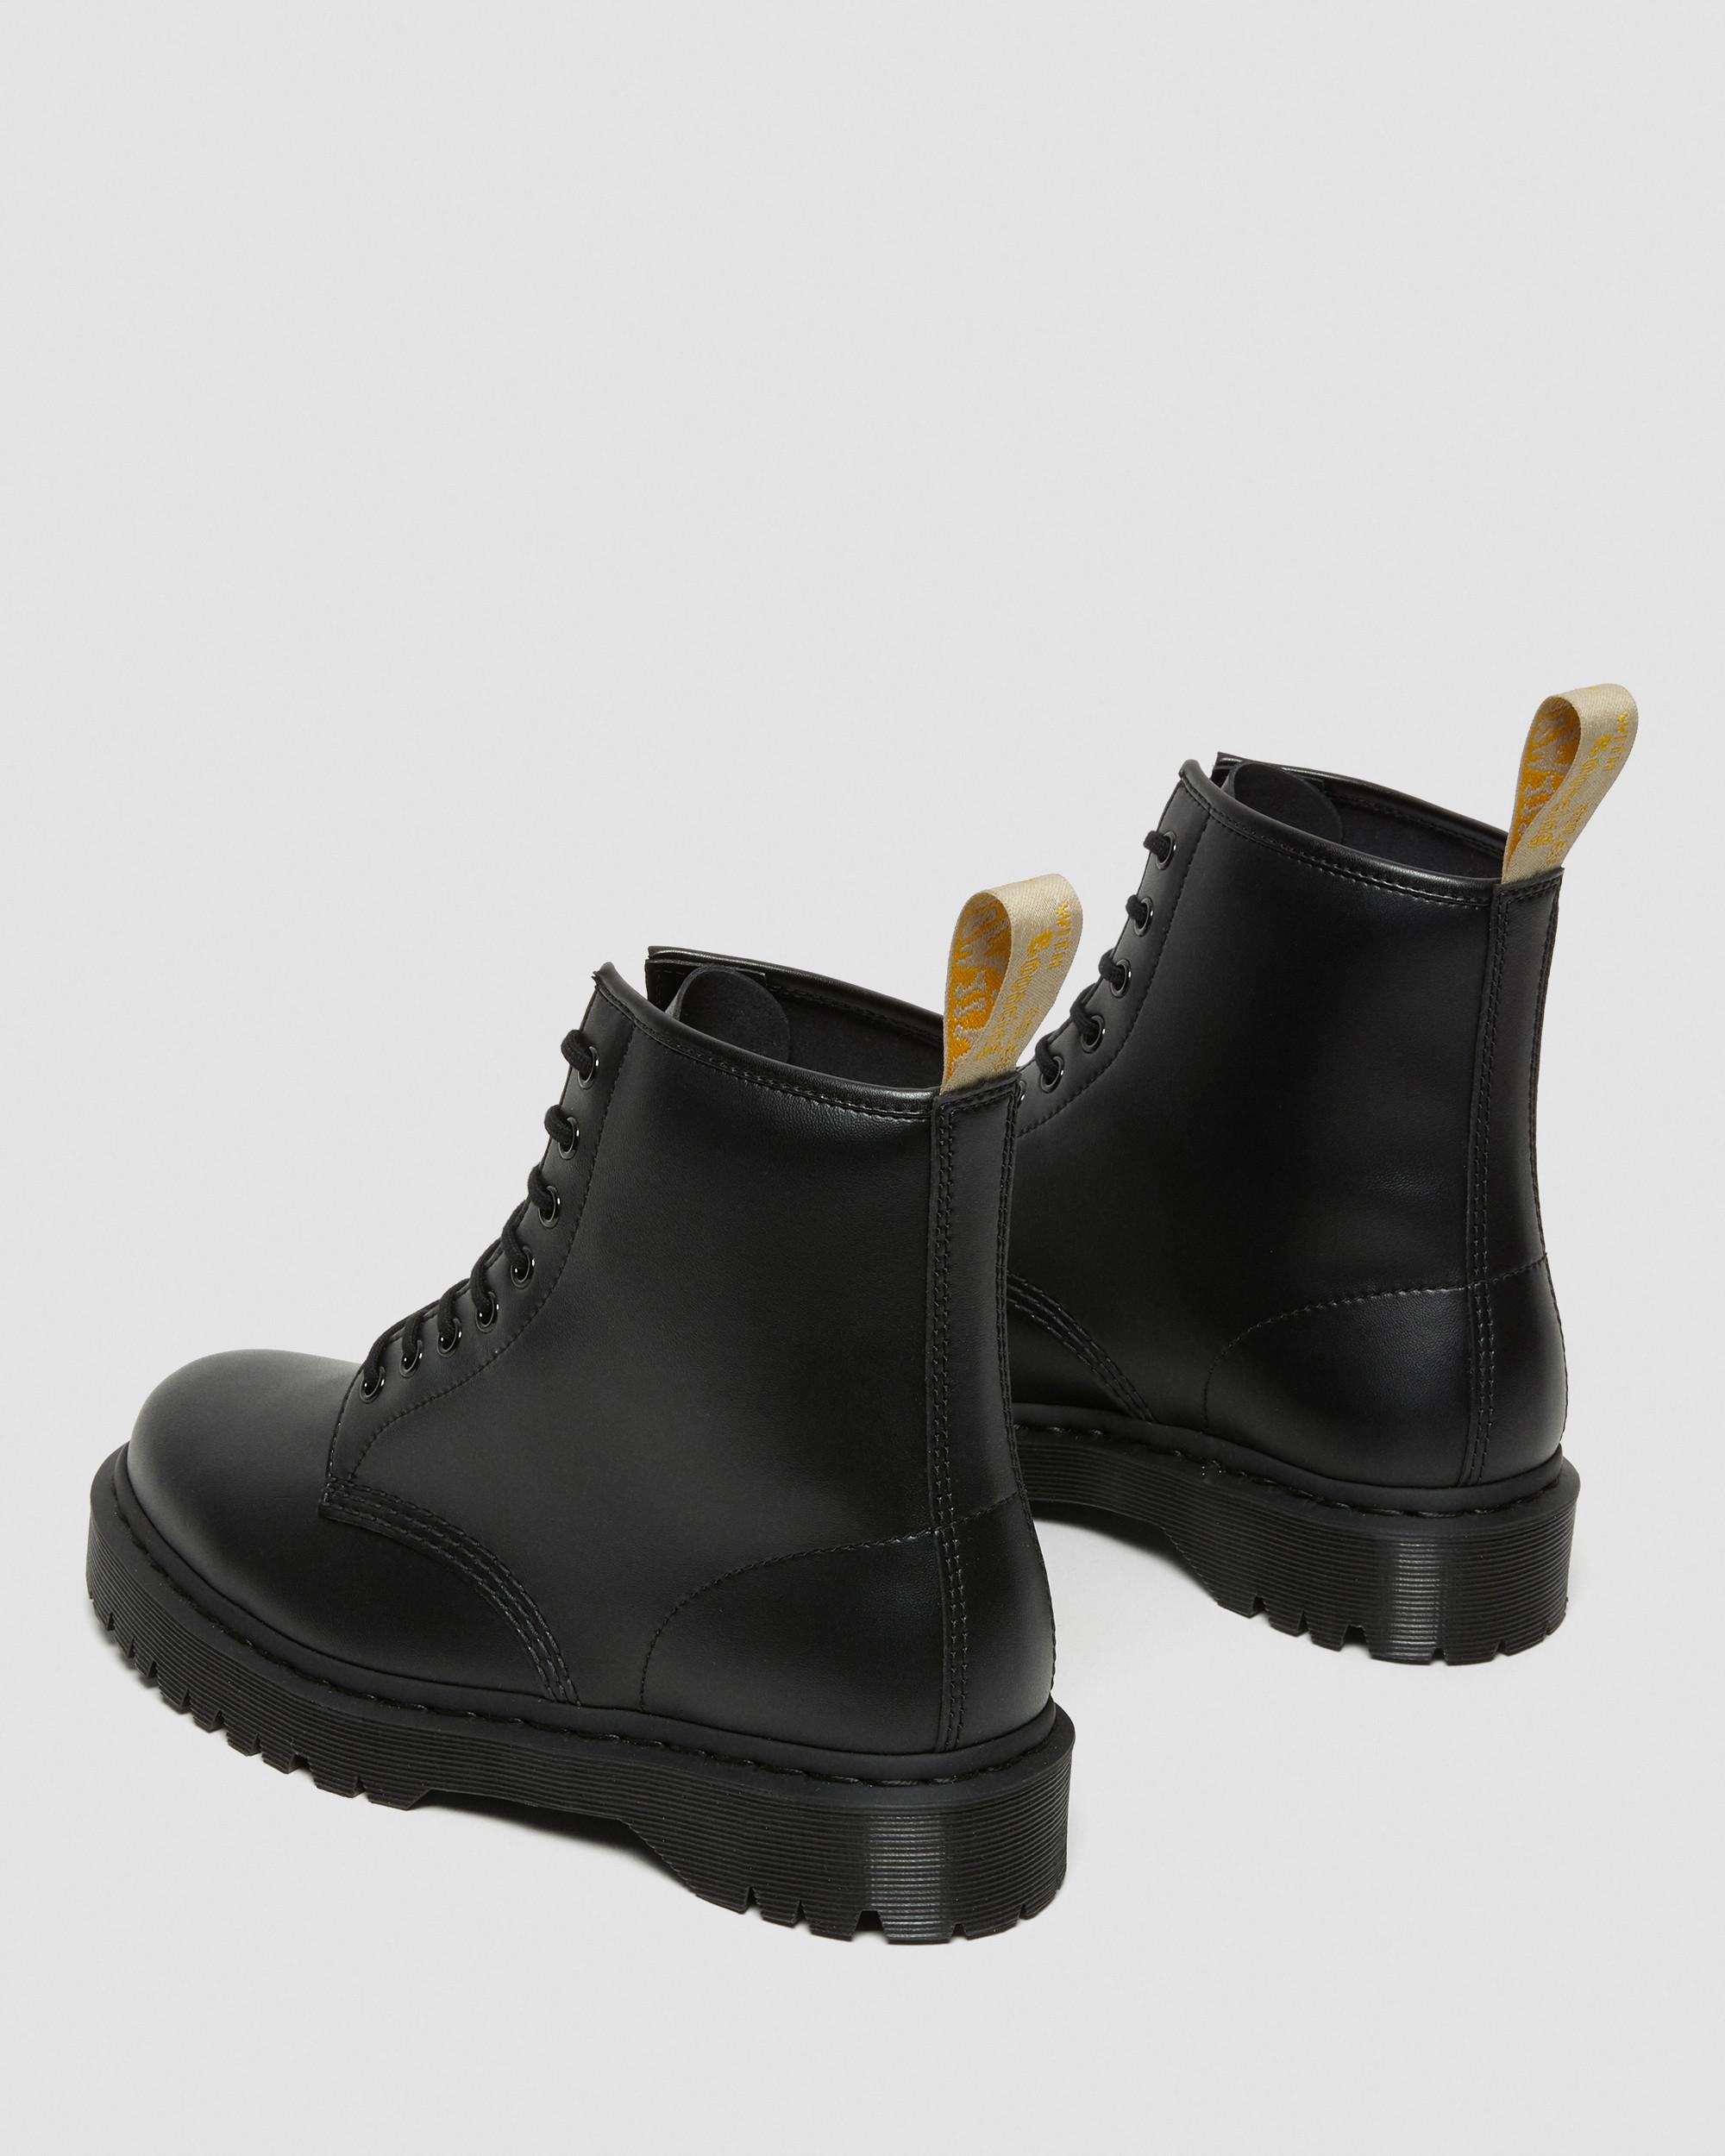 Vegan 1460 Bex Mono Lace Up Boots in Black | Dr. Martens